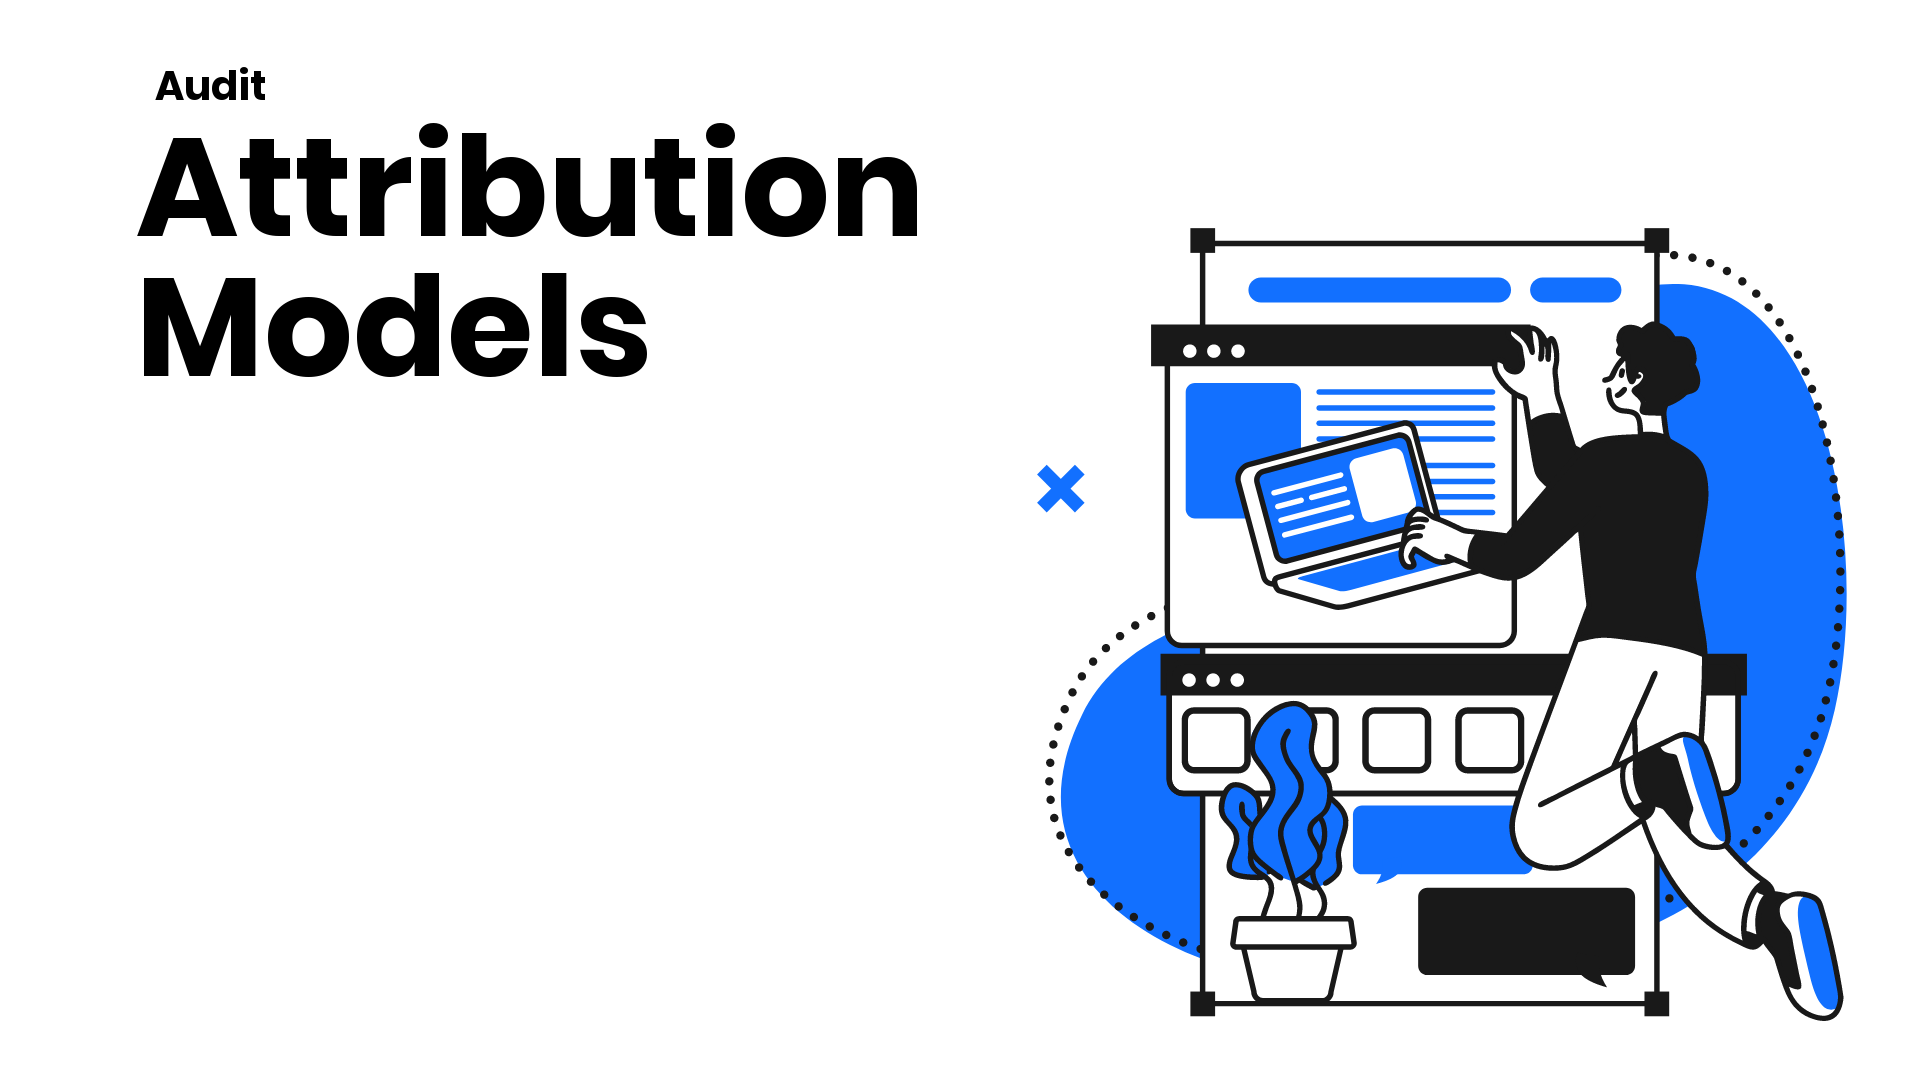 How to audit attribution models in Google Ads